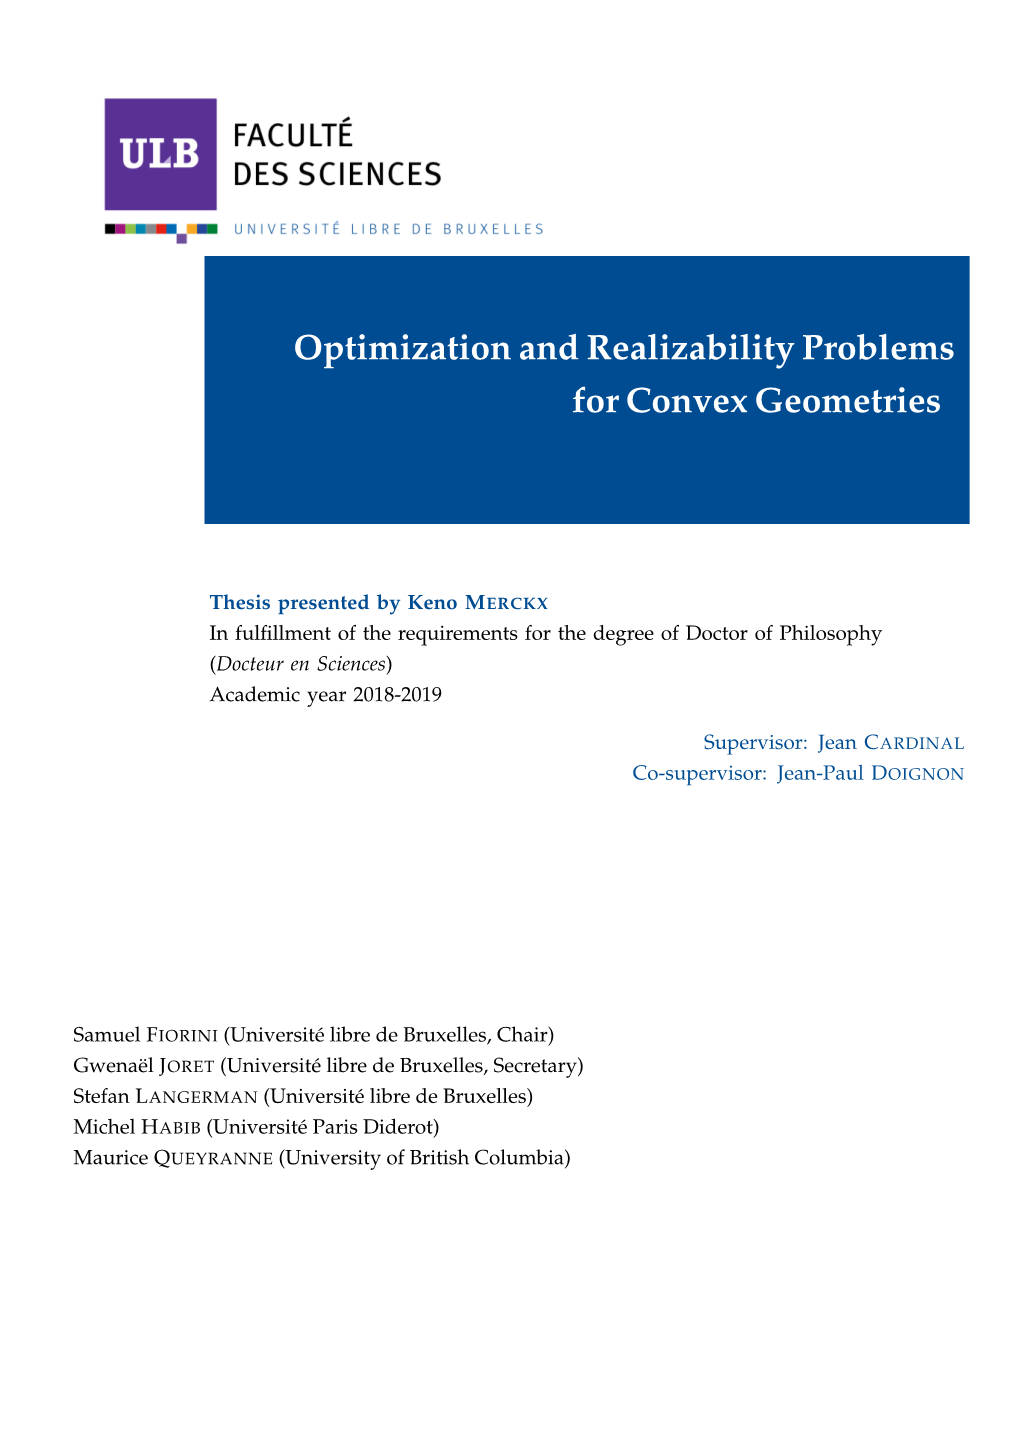 Optimization and Realizability Problems for Convex Geometries